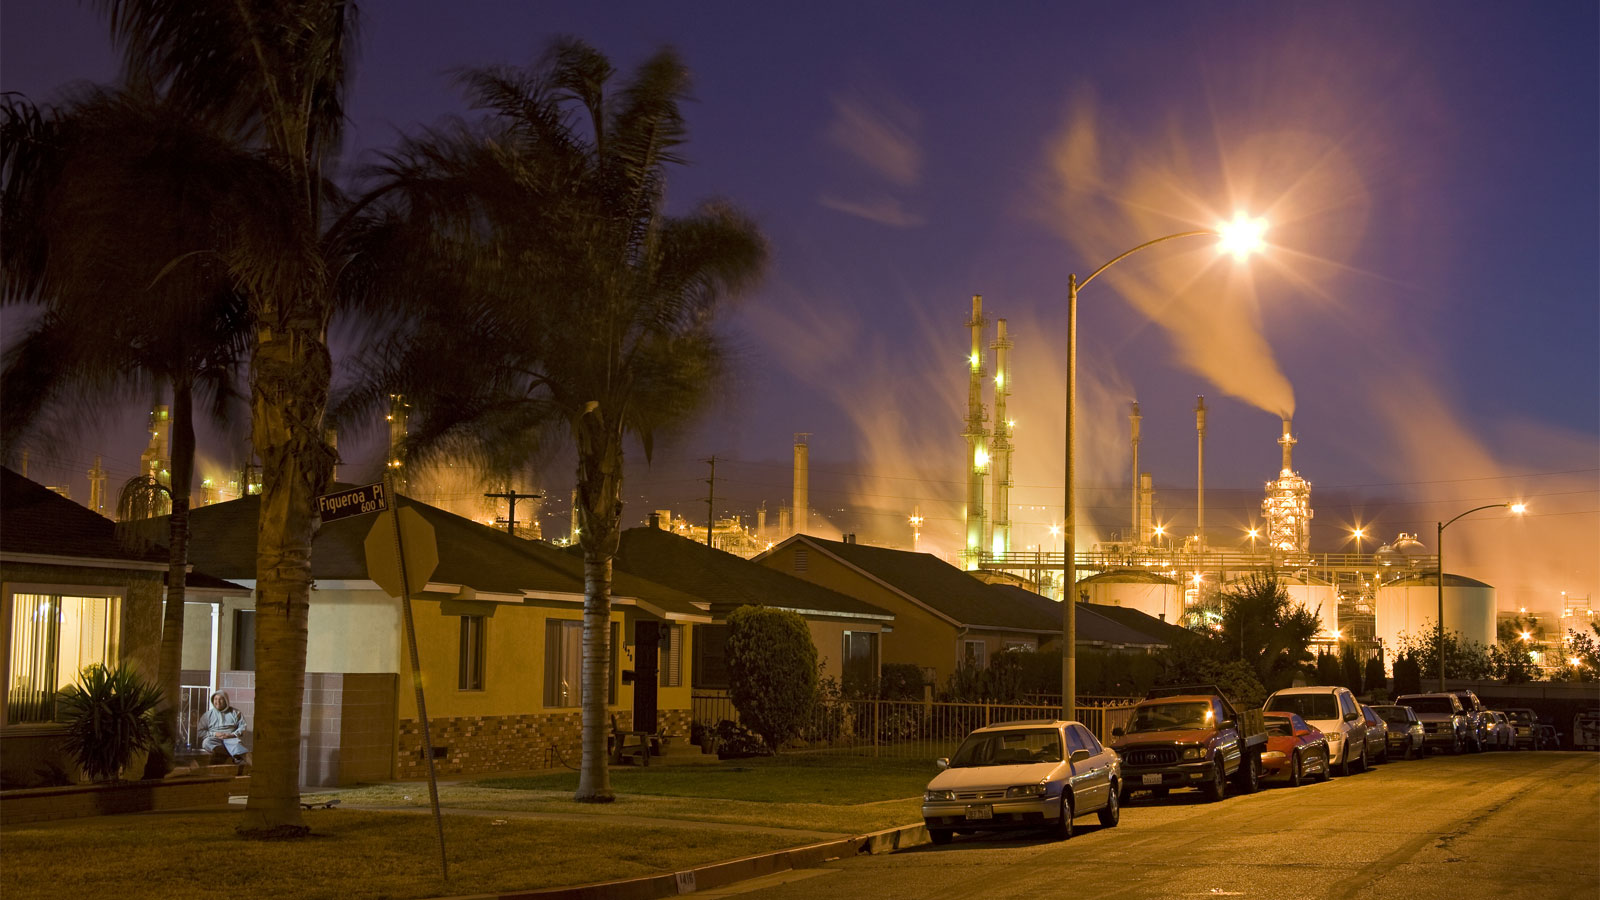 Residential street with palm trees, houses, and cars; oil refinery in near background